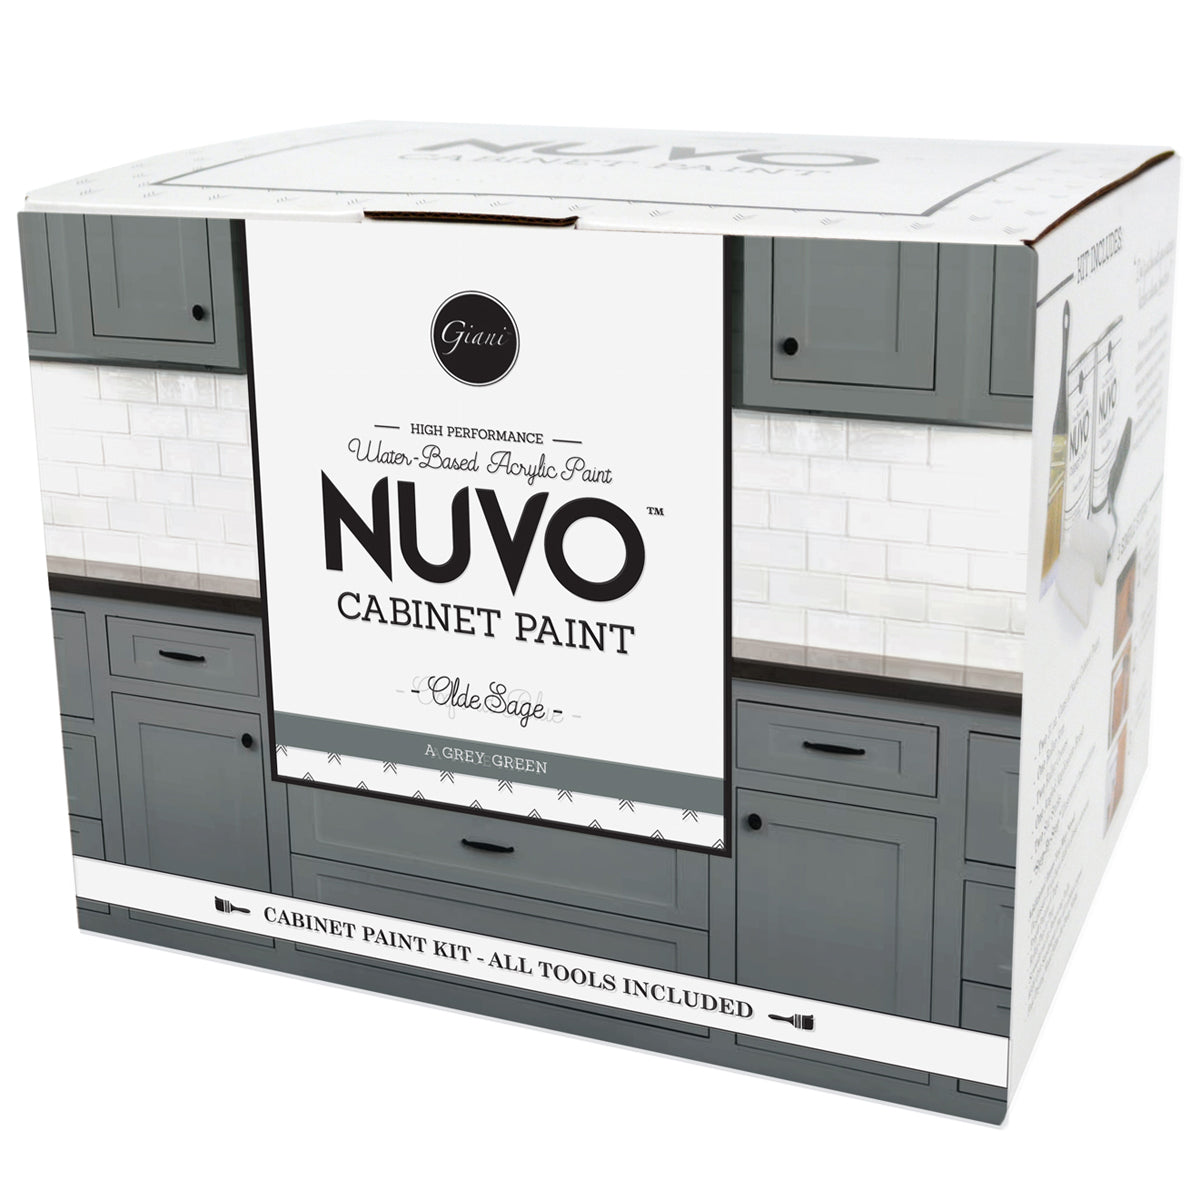 Nuvo Olde Sage Cabinet Paint Kit